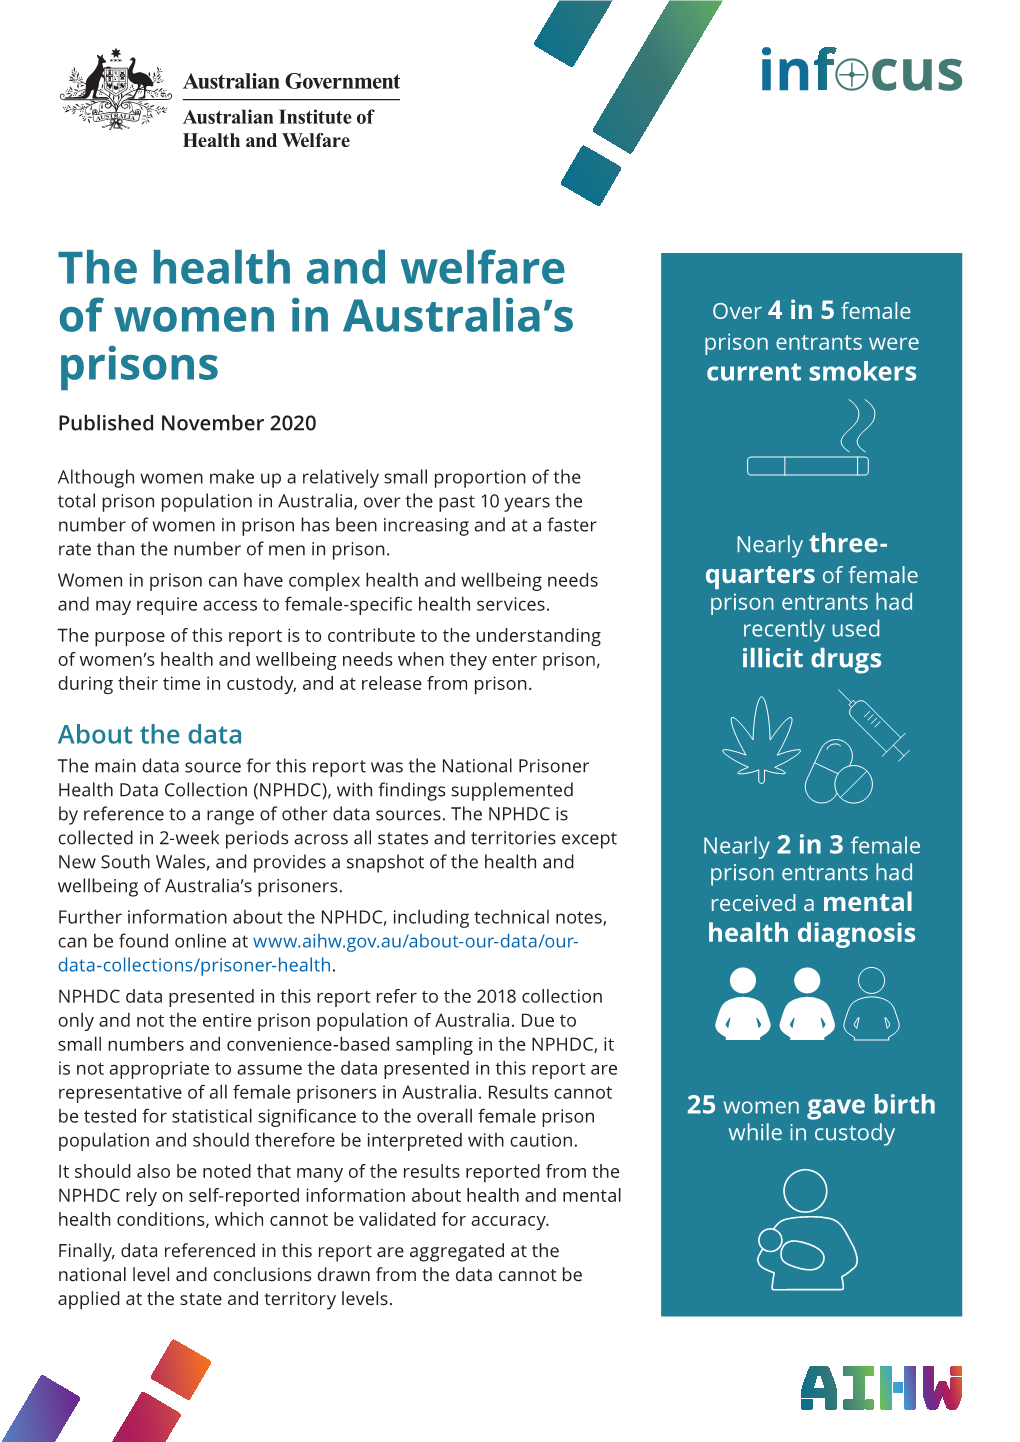 The Health and Welfare of Women in Australia's Prisons